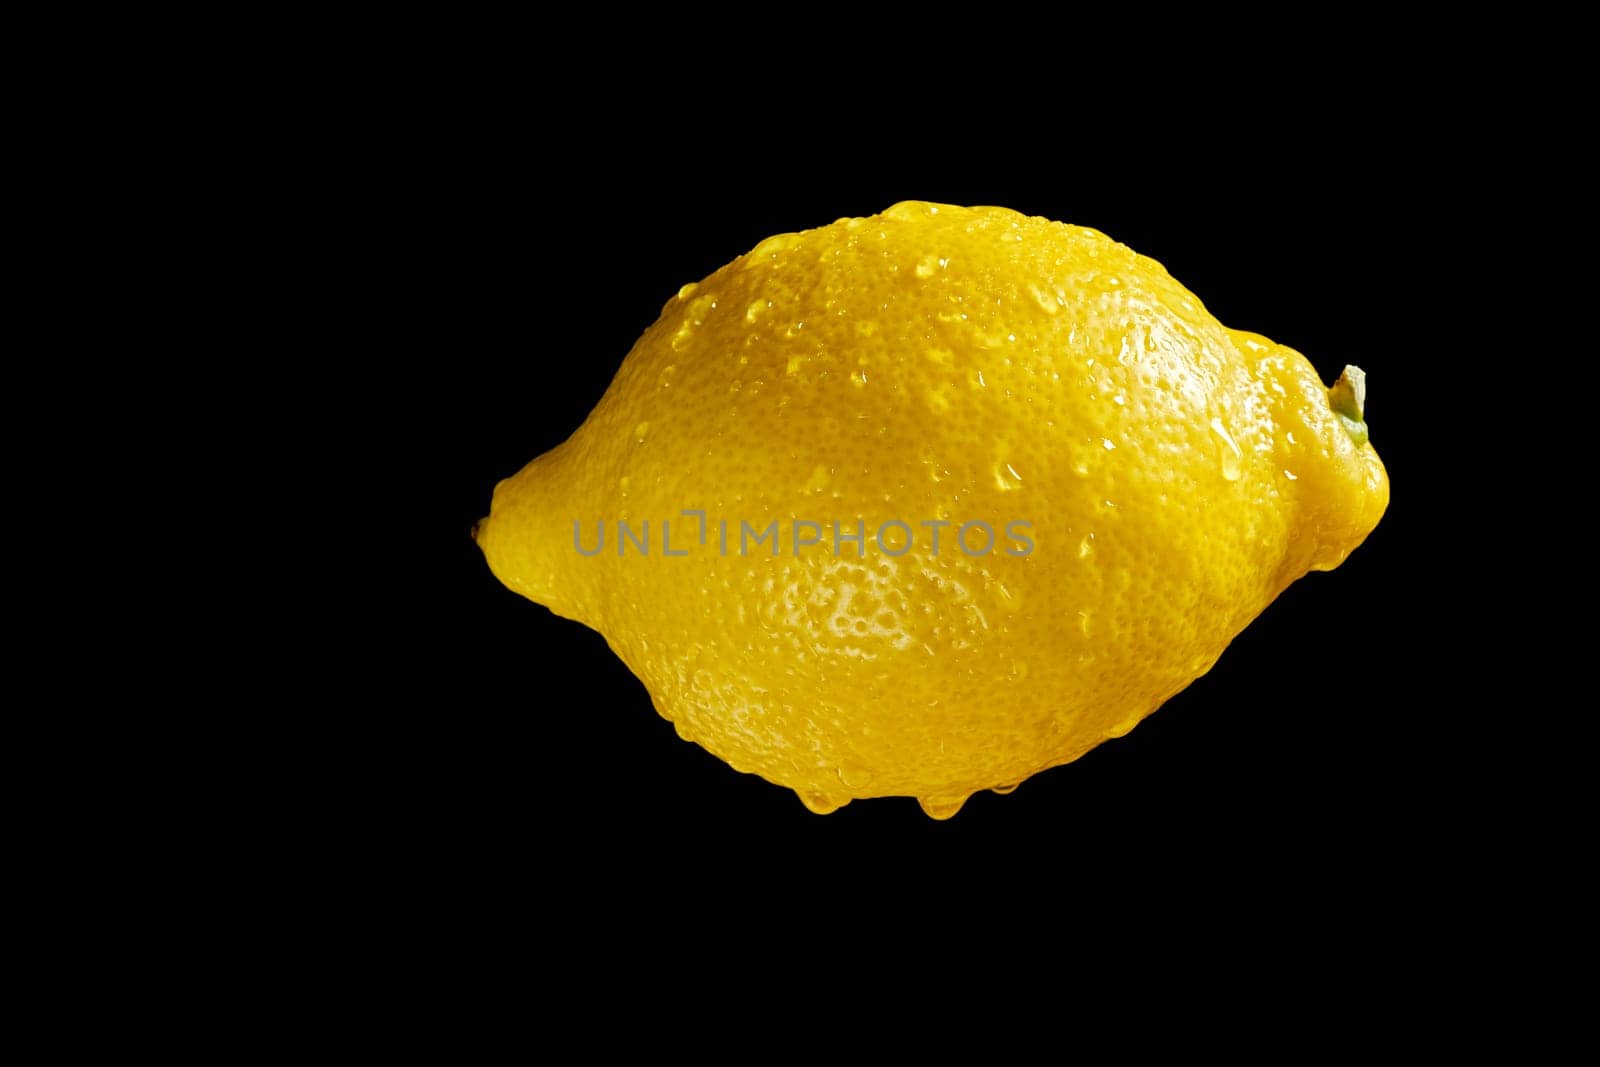 Close up of lemon with water droplets on black background by superstellar